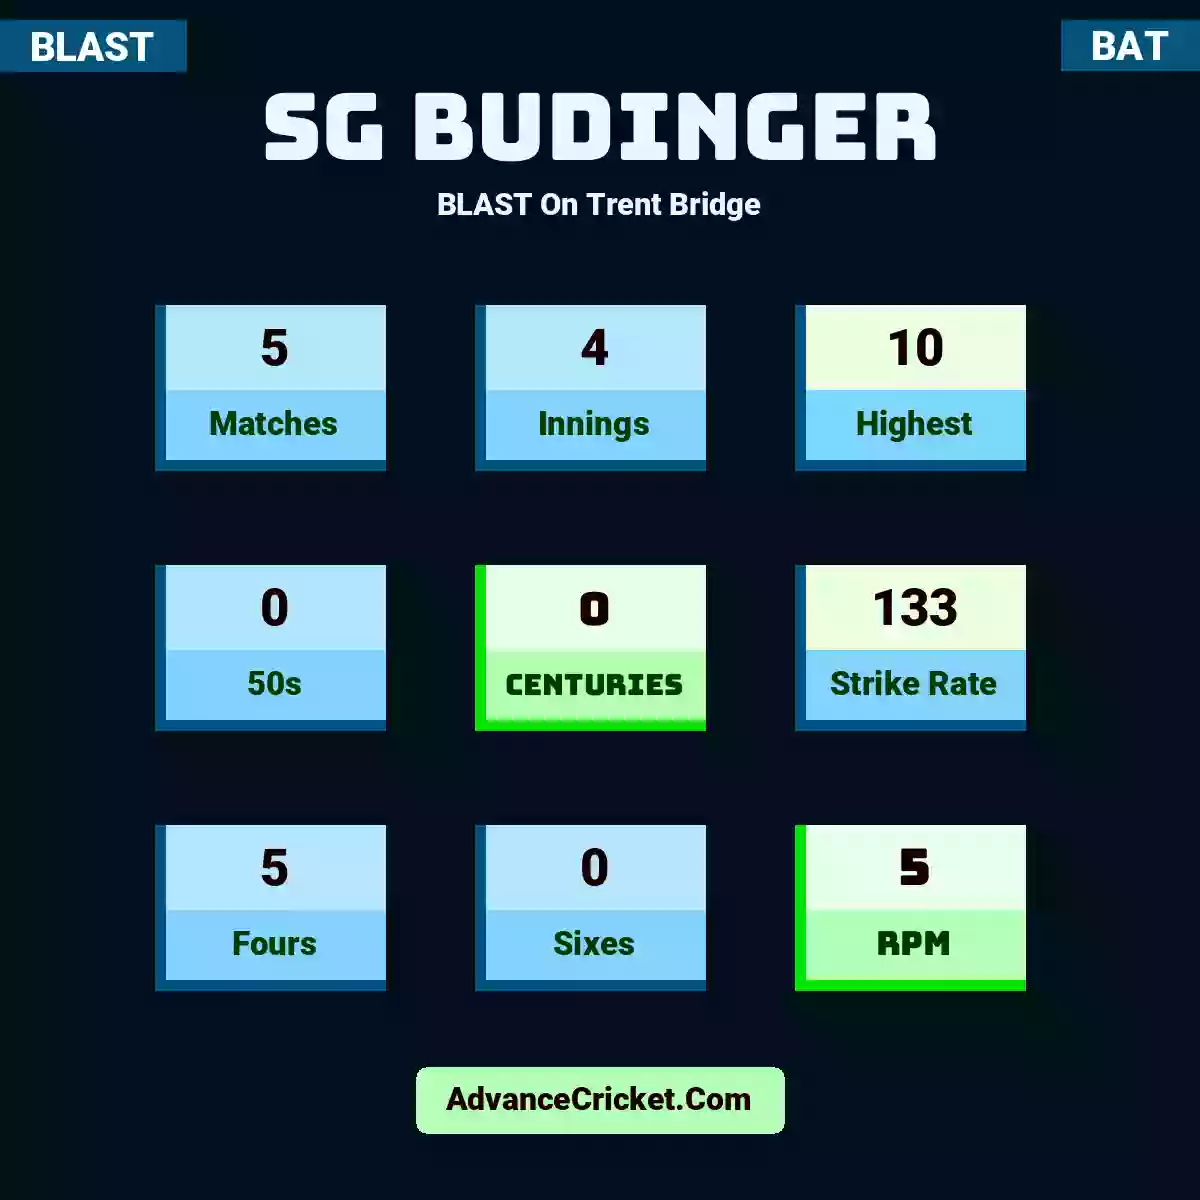 SG Budinger BLAST  On Trent Bridge, SG Budinger played 5 matches, scored 10 runs as highest, 0 half-centuries, and 0 centuries, with a strike rate of 133. S.Budinger hit 5 fours and 0 sixes, with an RPM of 5.